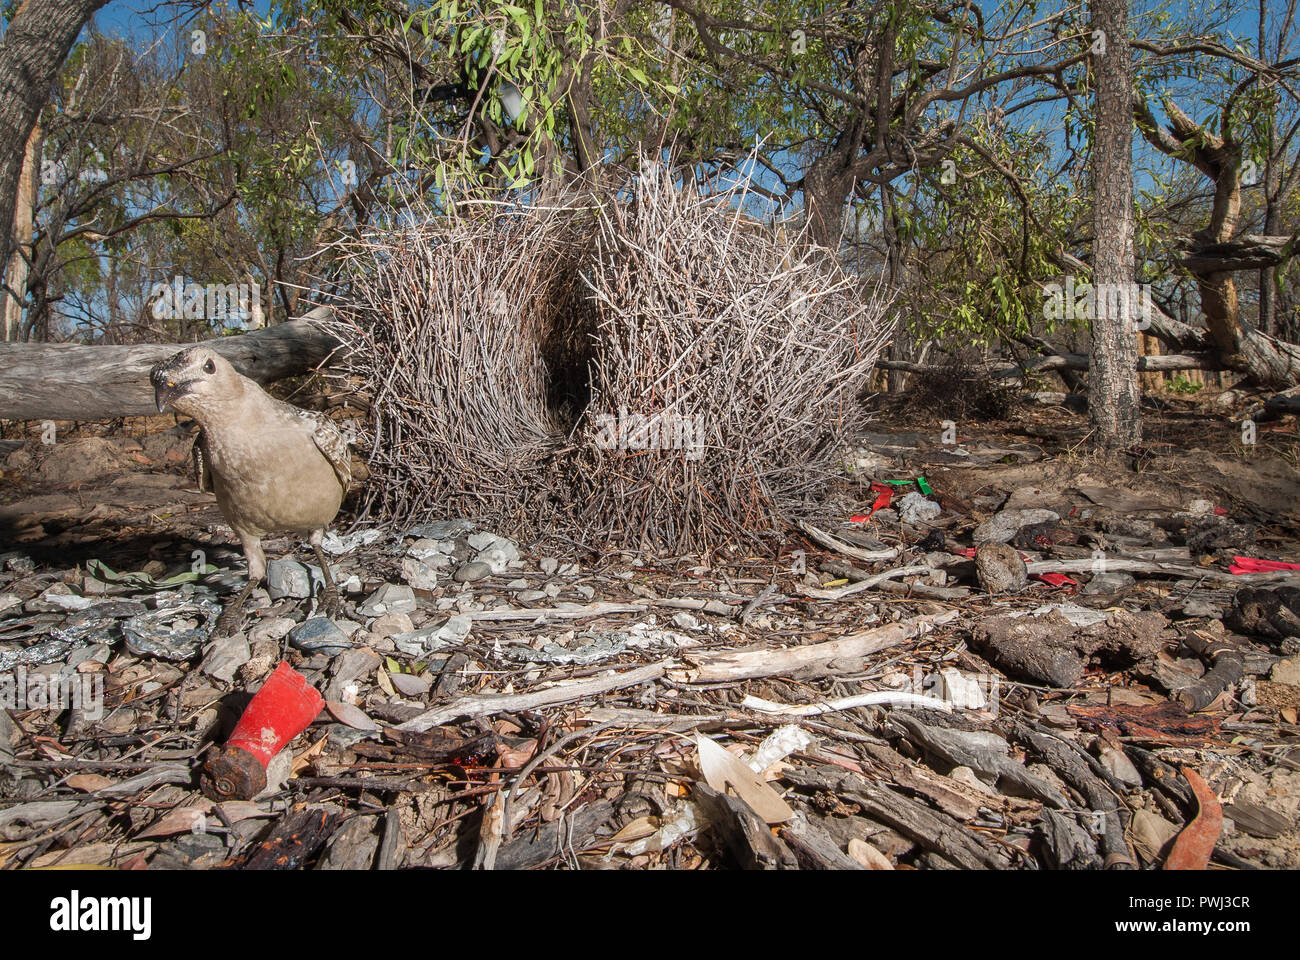 Great Bower Bird, busily and fastidiously repairs his bower and prepares gifts in and around his courtship grounds in readiness for female arrivals. Stock Photo